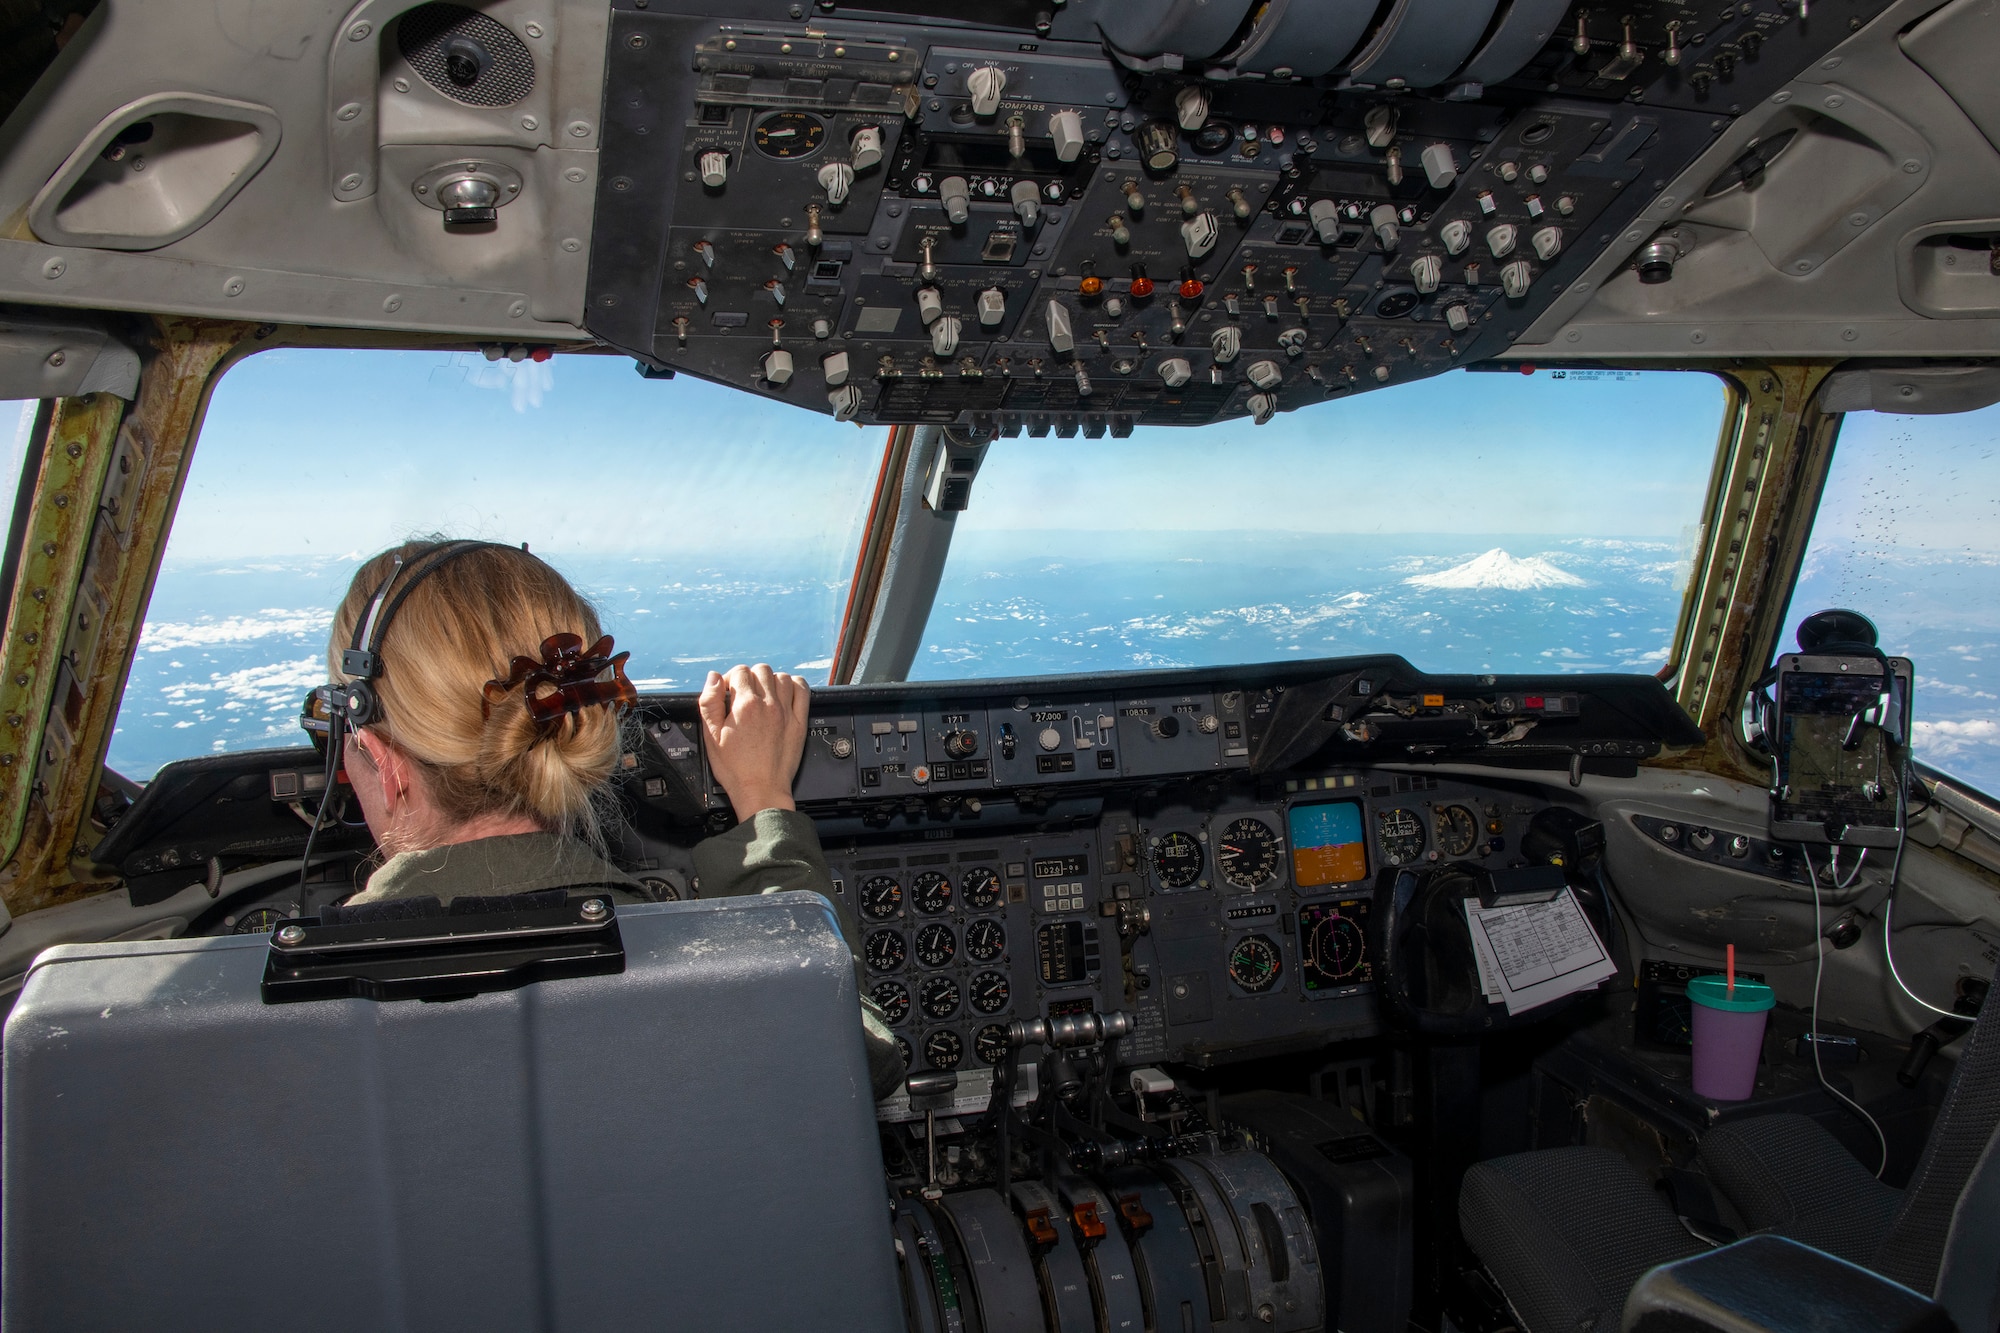 U.S. Air Force Maj. Jessie Olson, 79th Air Refueling Squadron KC-10 Extender instructor pilot, flies a tanker over the Pacific Northwest, March 22, 2022. In honor of Women's History Month, an all-female KC-10 flight crew from the 60th and 349th Air Mobility Wings flew on an aerial refueling training mission over California and Oregon. (U.S. Air Force photo by Heide)